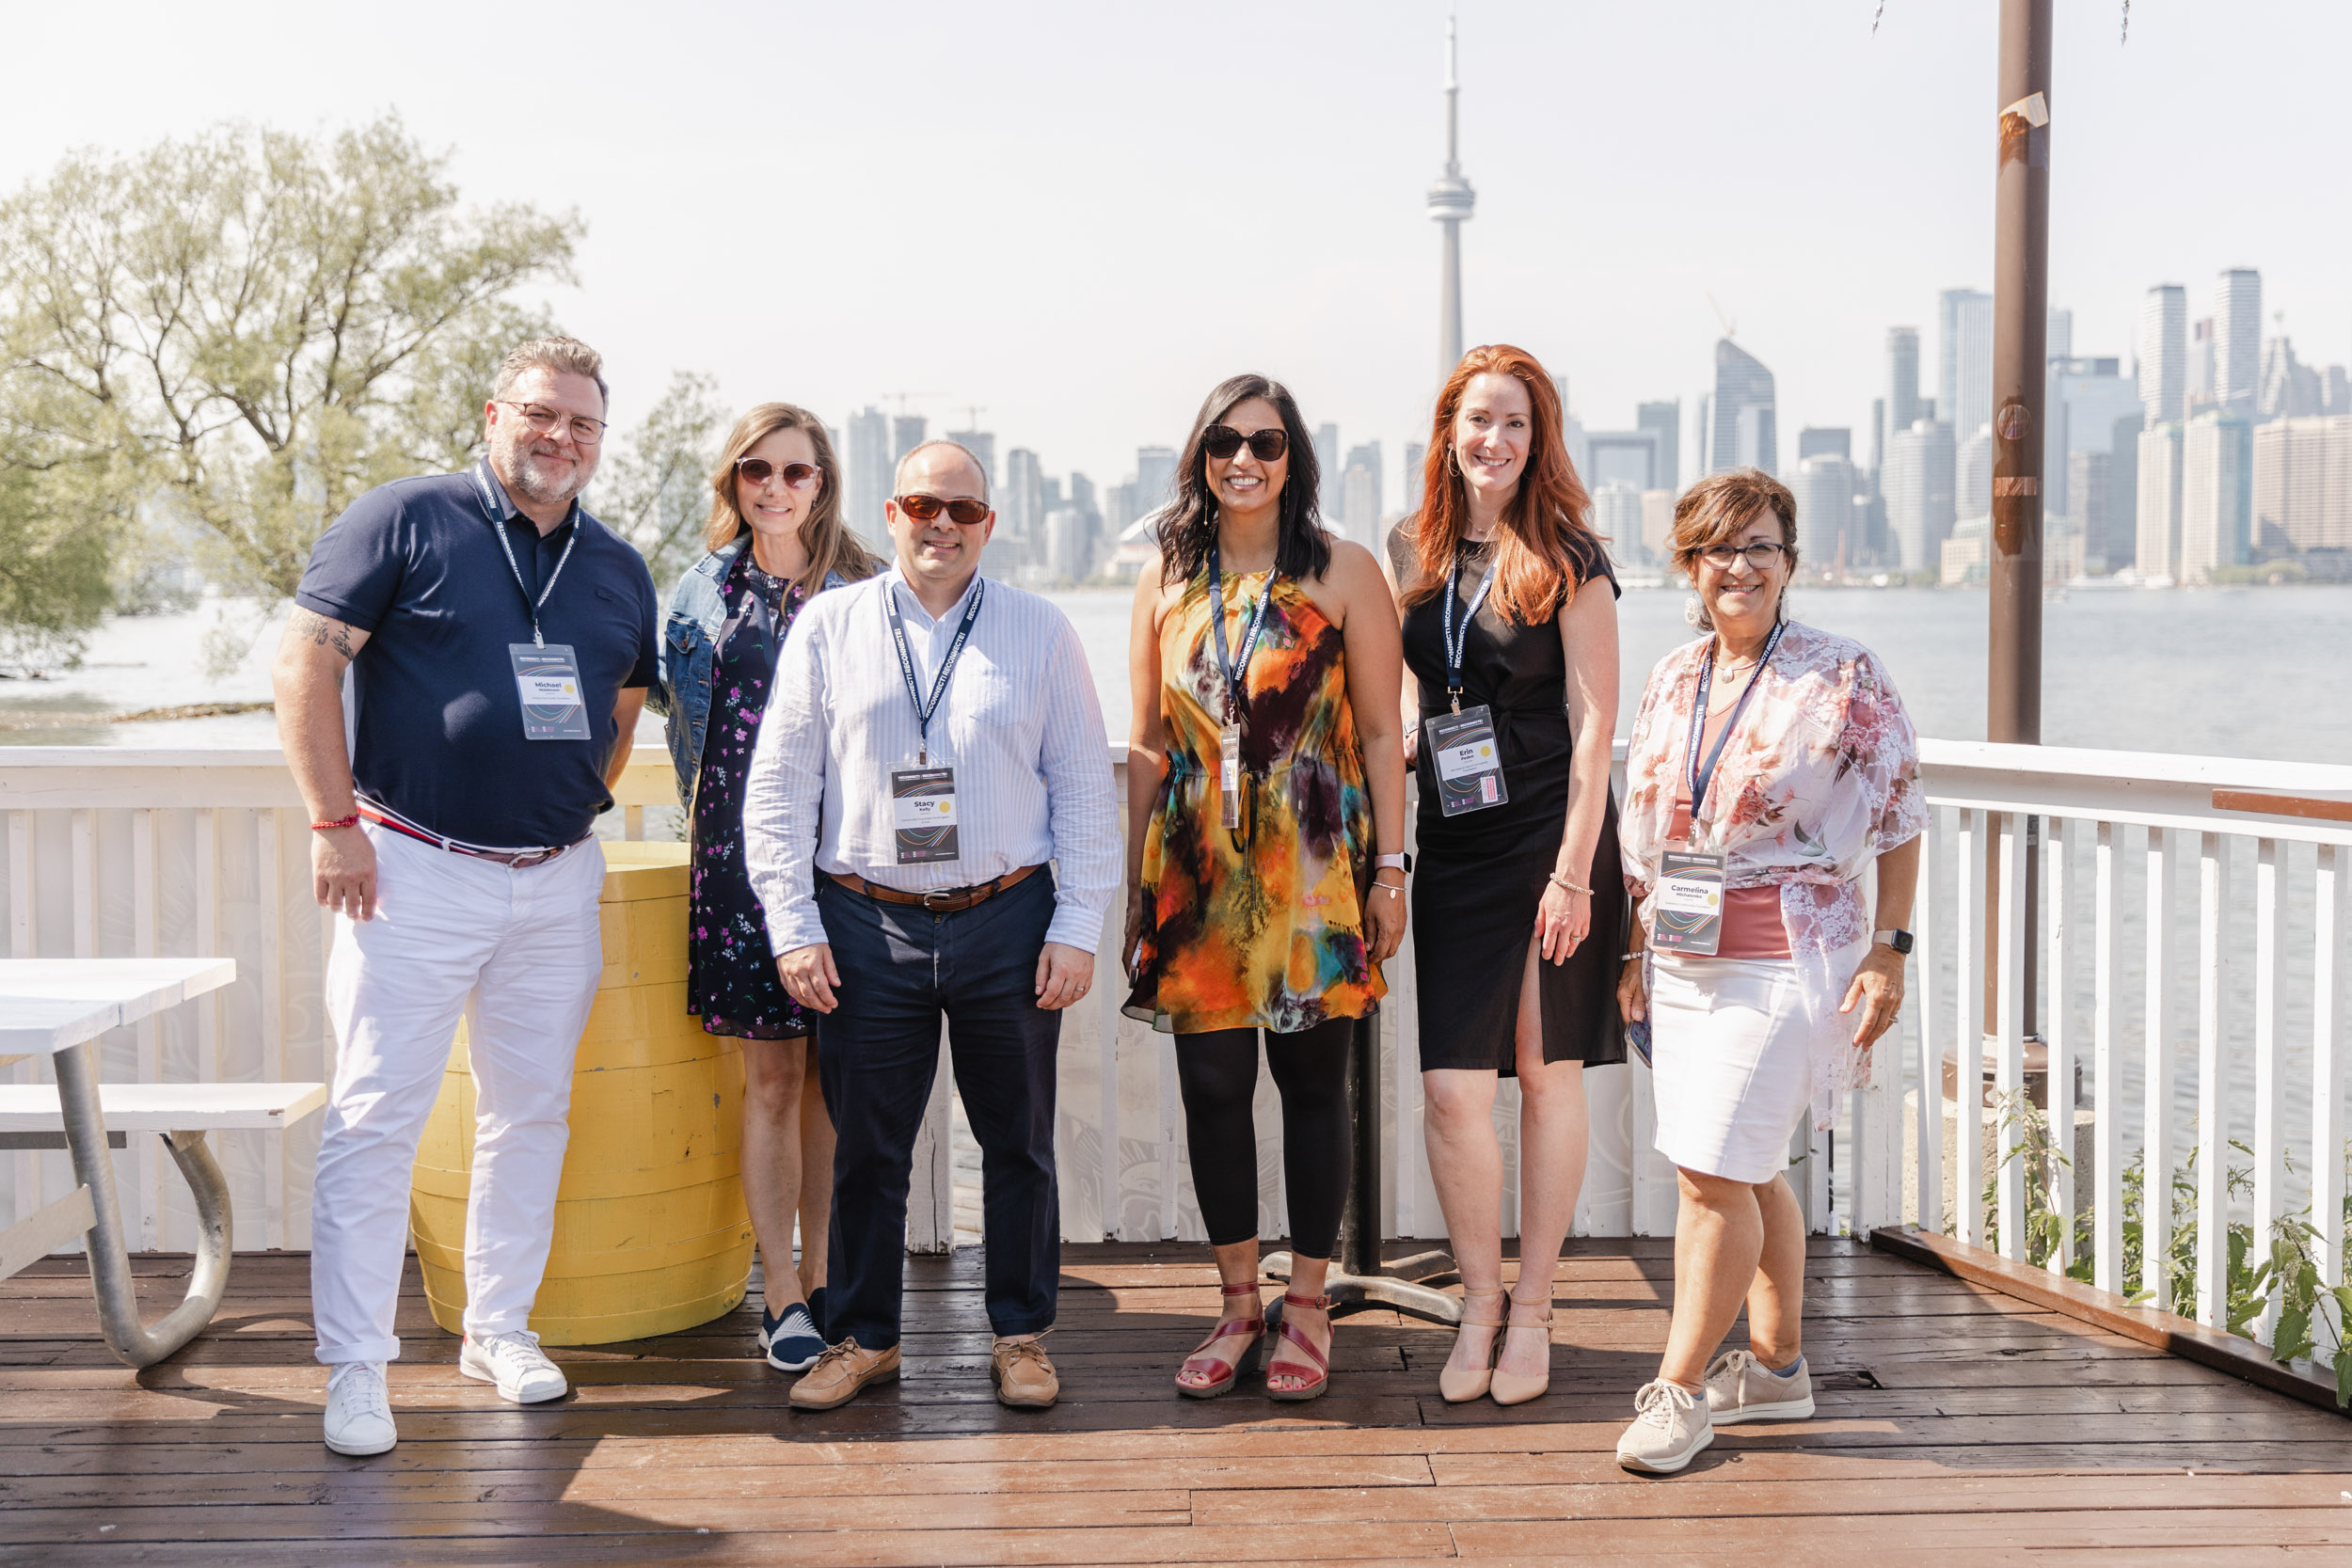 Conference attendees posing on a deck overlooking the city.